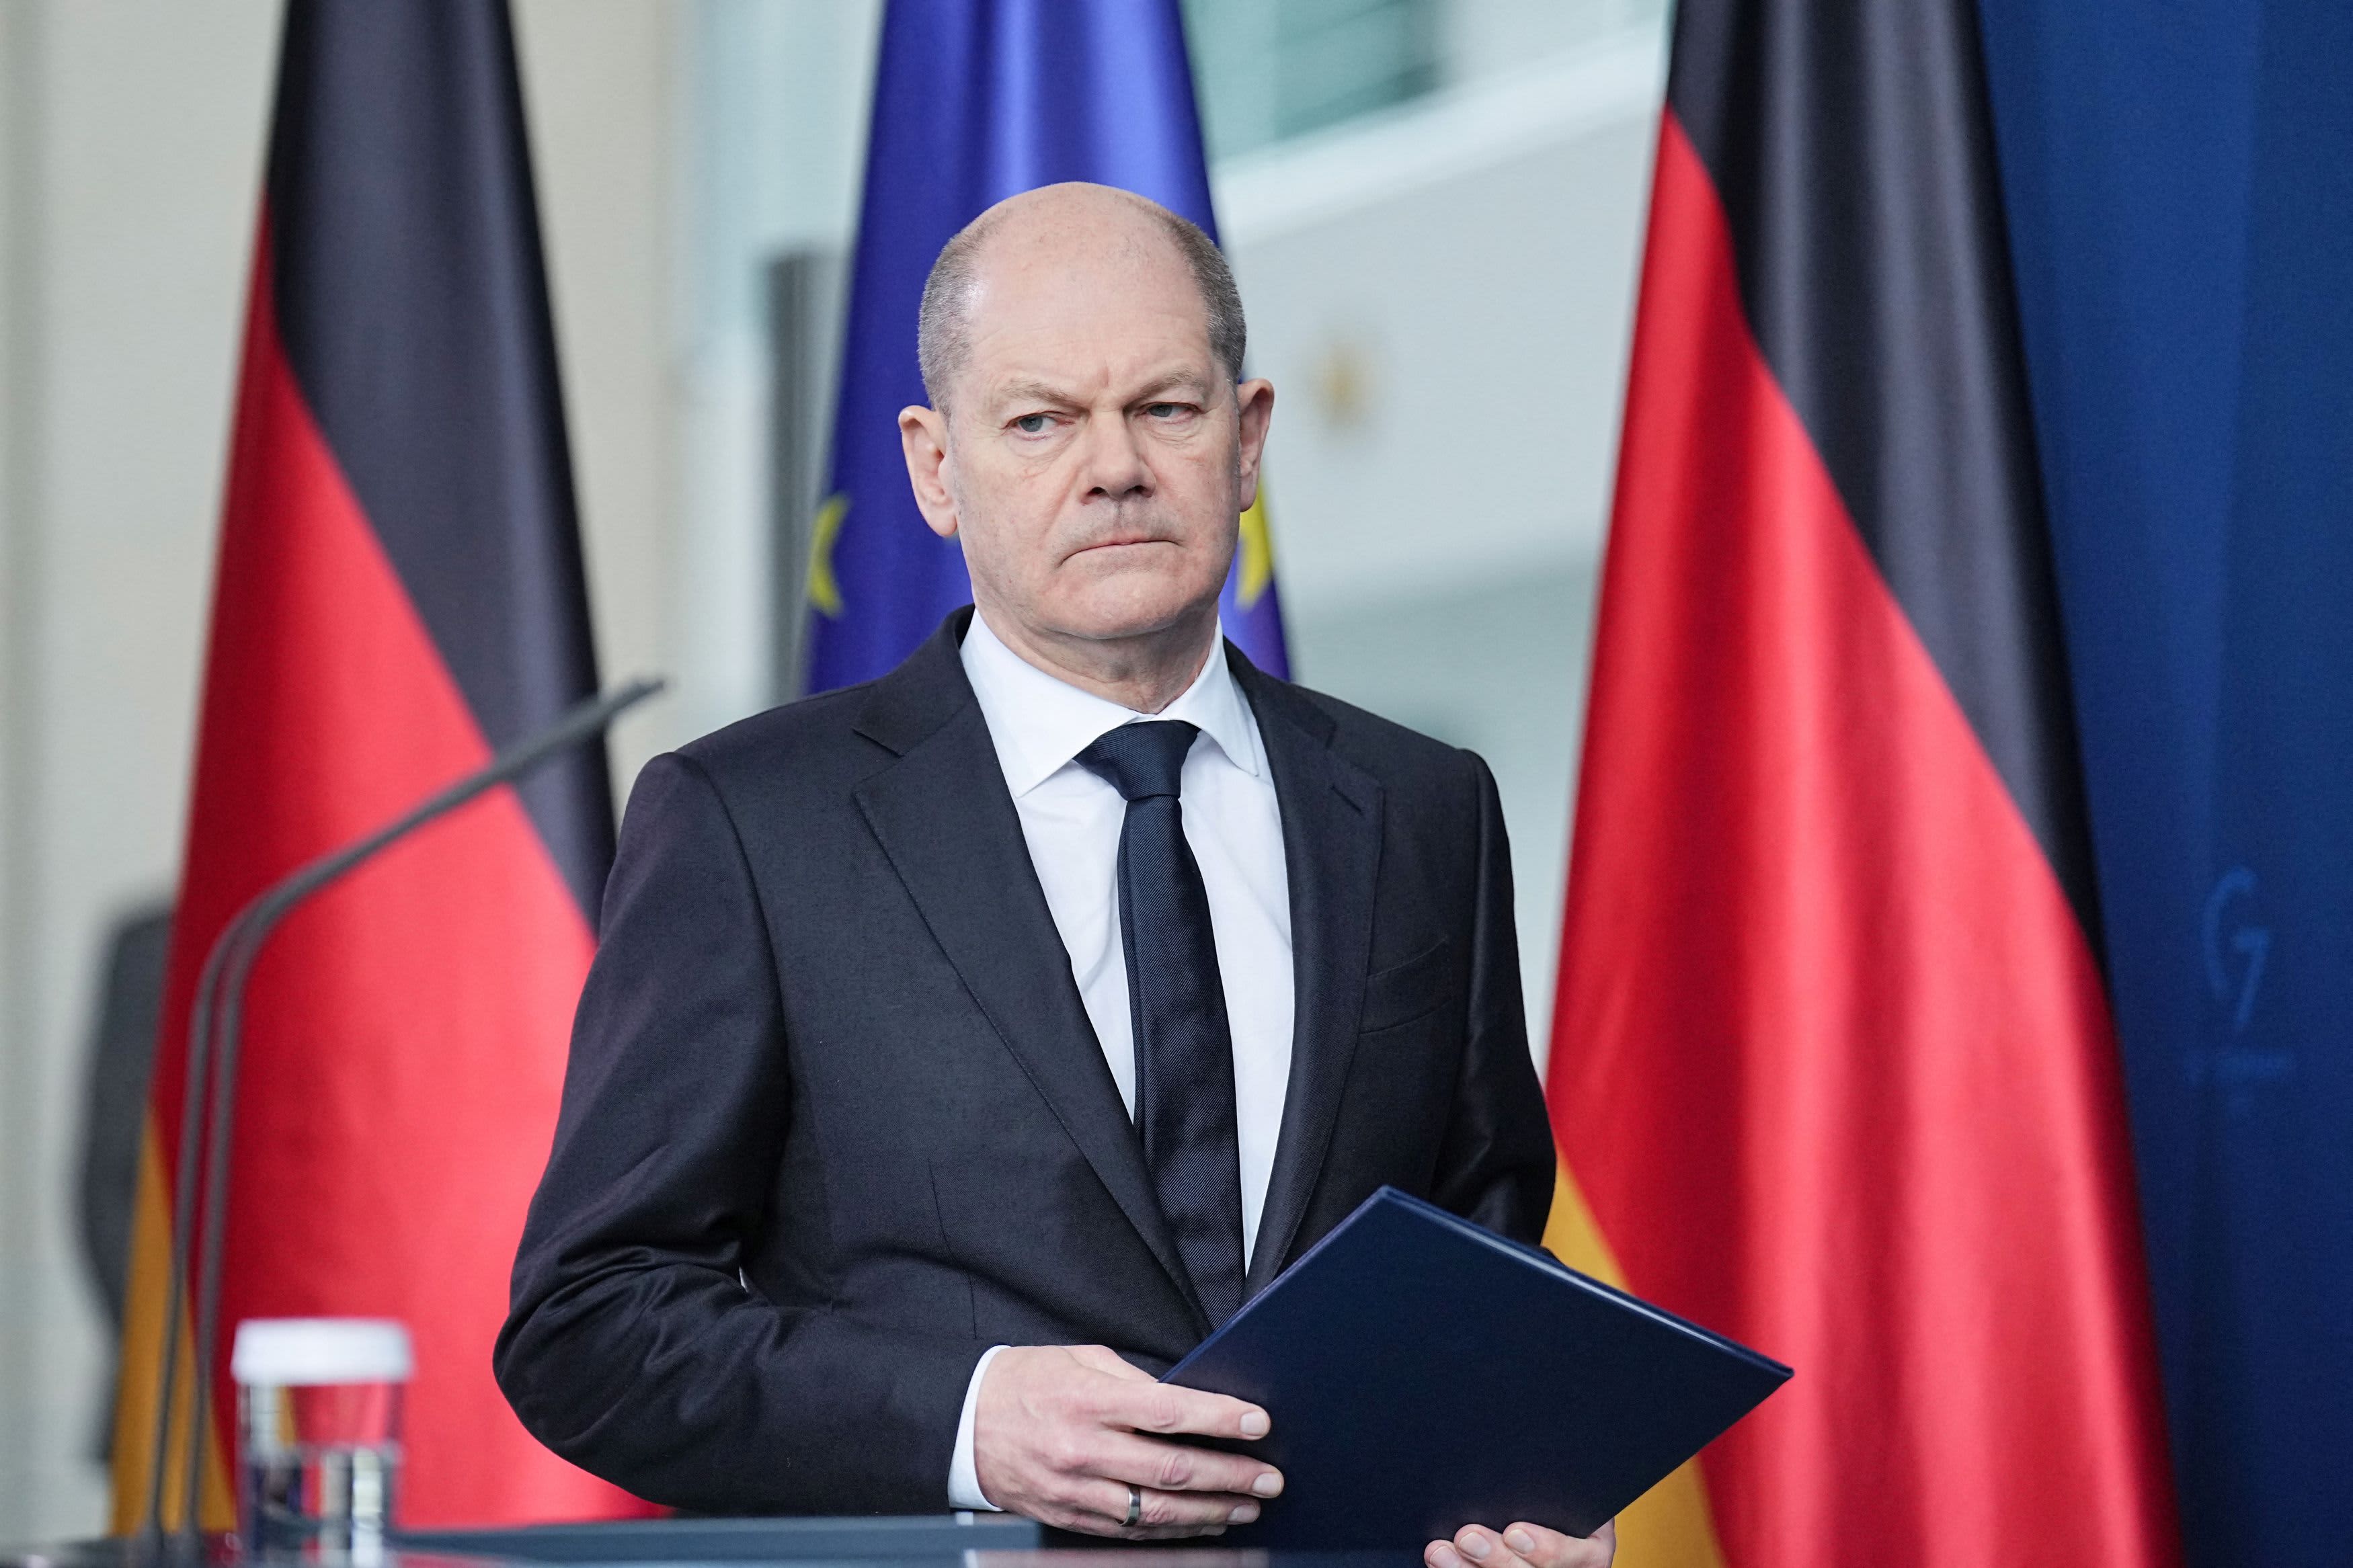 Germany announces major defense policy shift in face of Russia’s Ukraine invasion